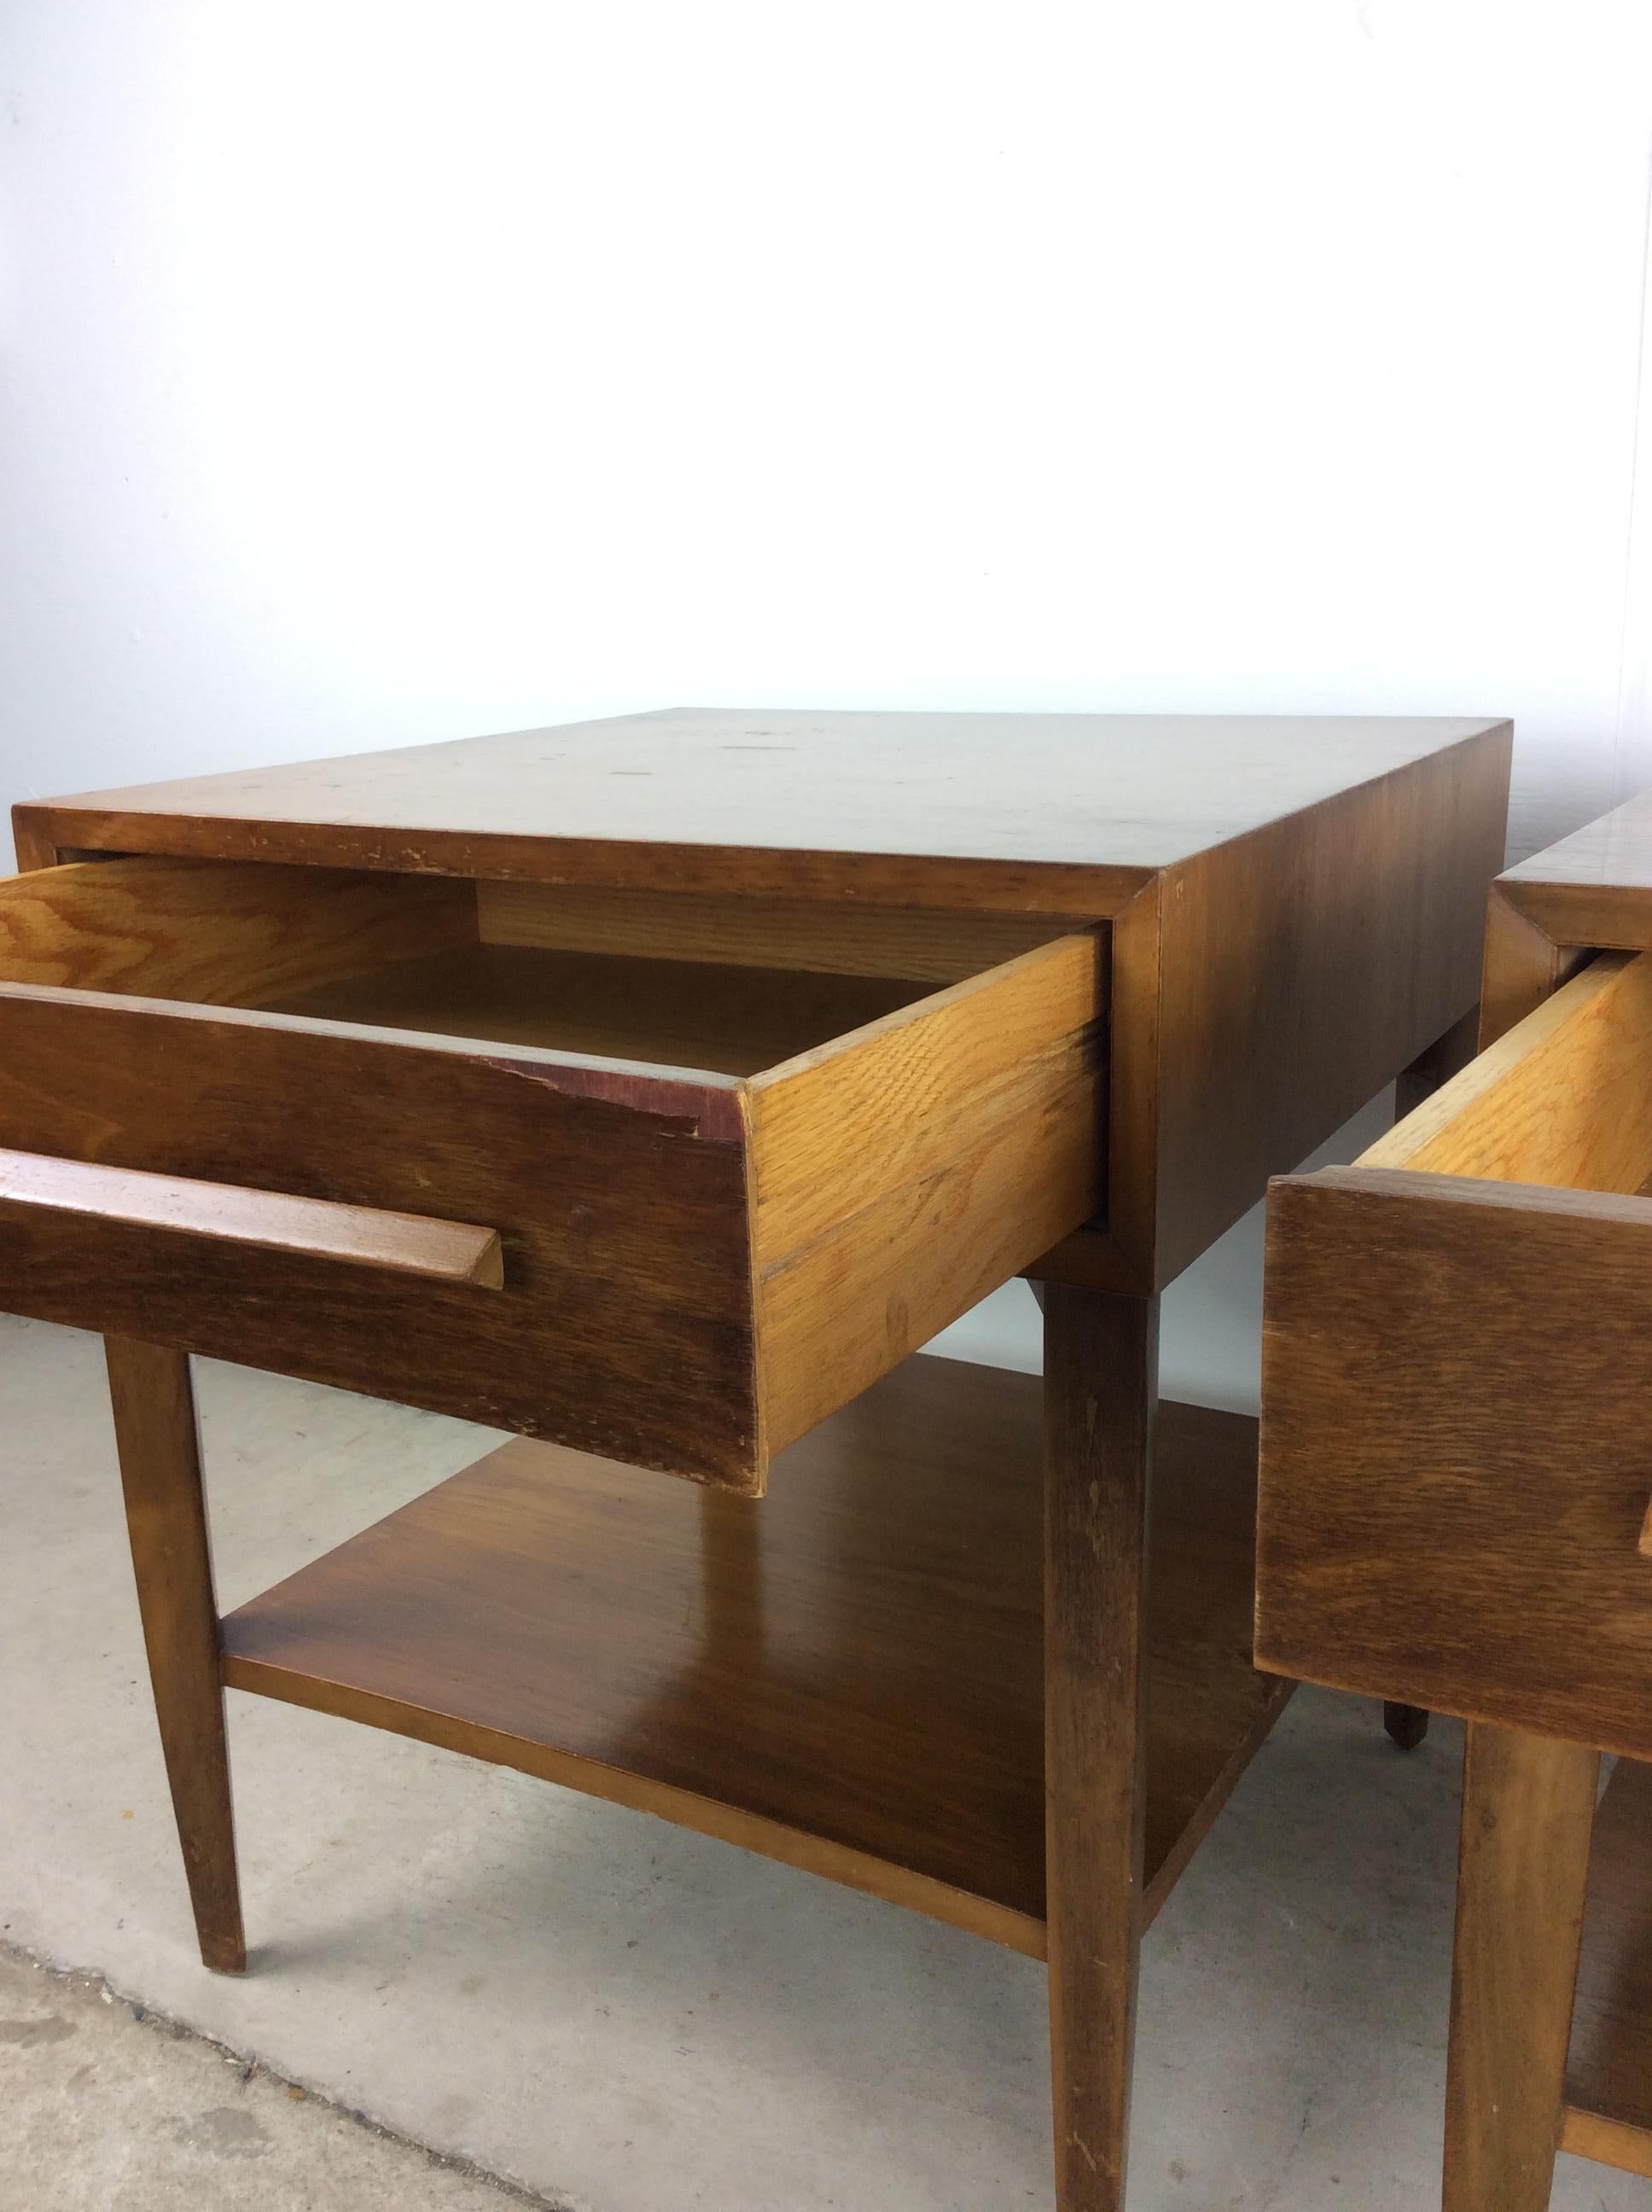 Pair of Mid Century Modern Single Drawer Nightstands by Widdicomb For Sale 11